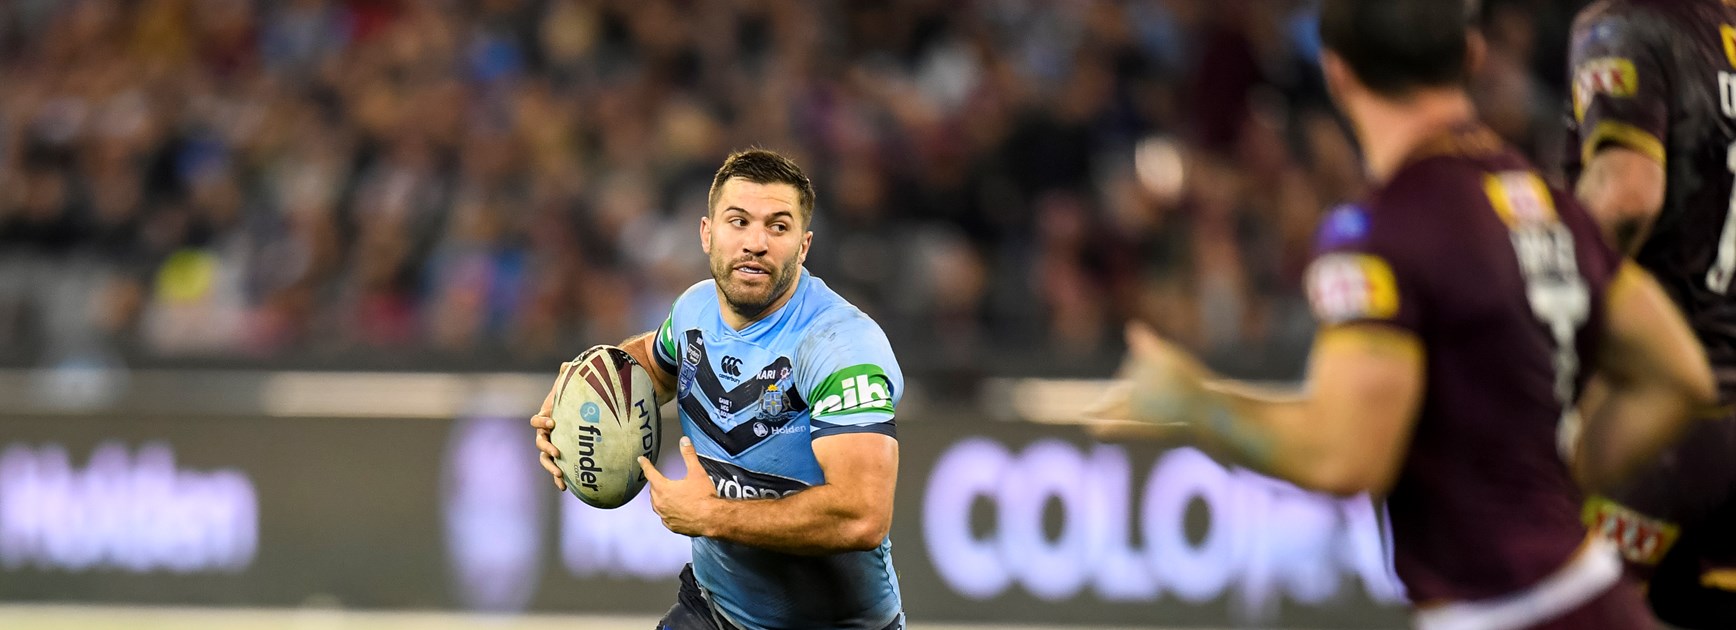 Tedesco beats 28-year Origin record for tackle busts